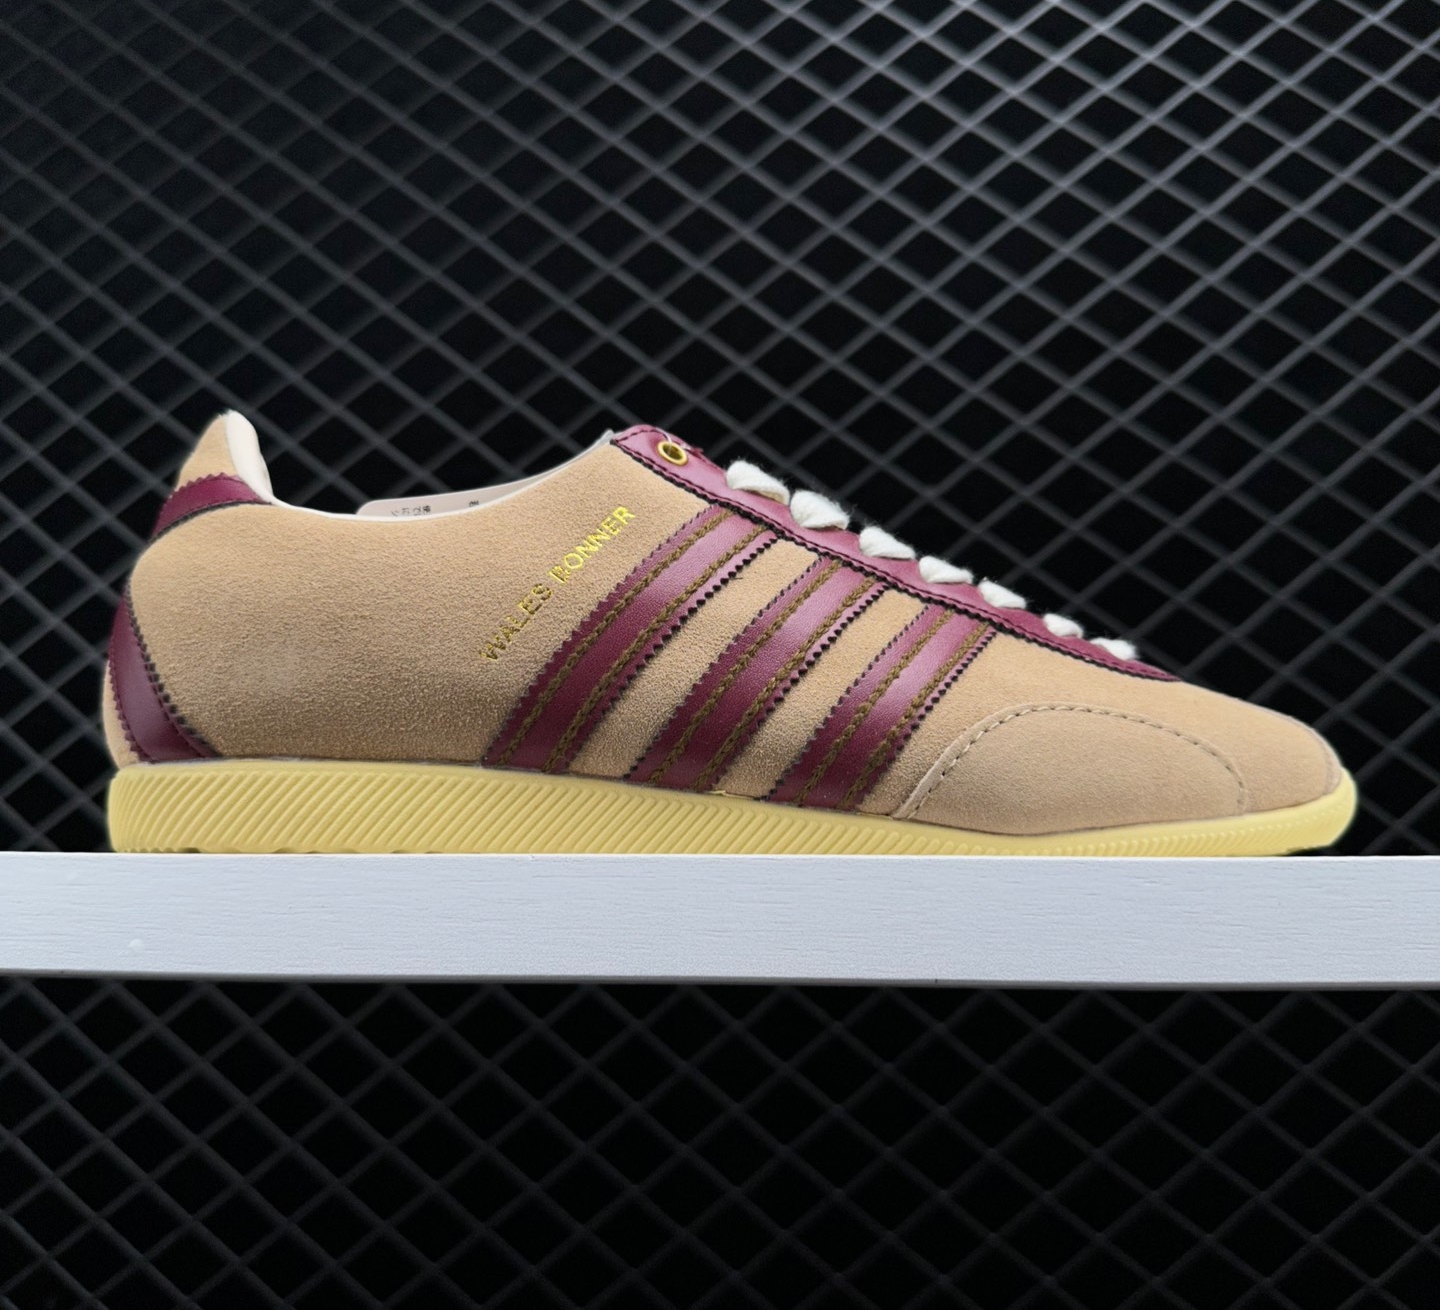 Adidas Wales Bonner x Japan 'Cardboard Collegiate Burgundy' GY5750 - Exclusive Collaboration Sneakers